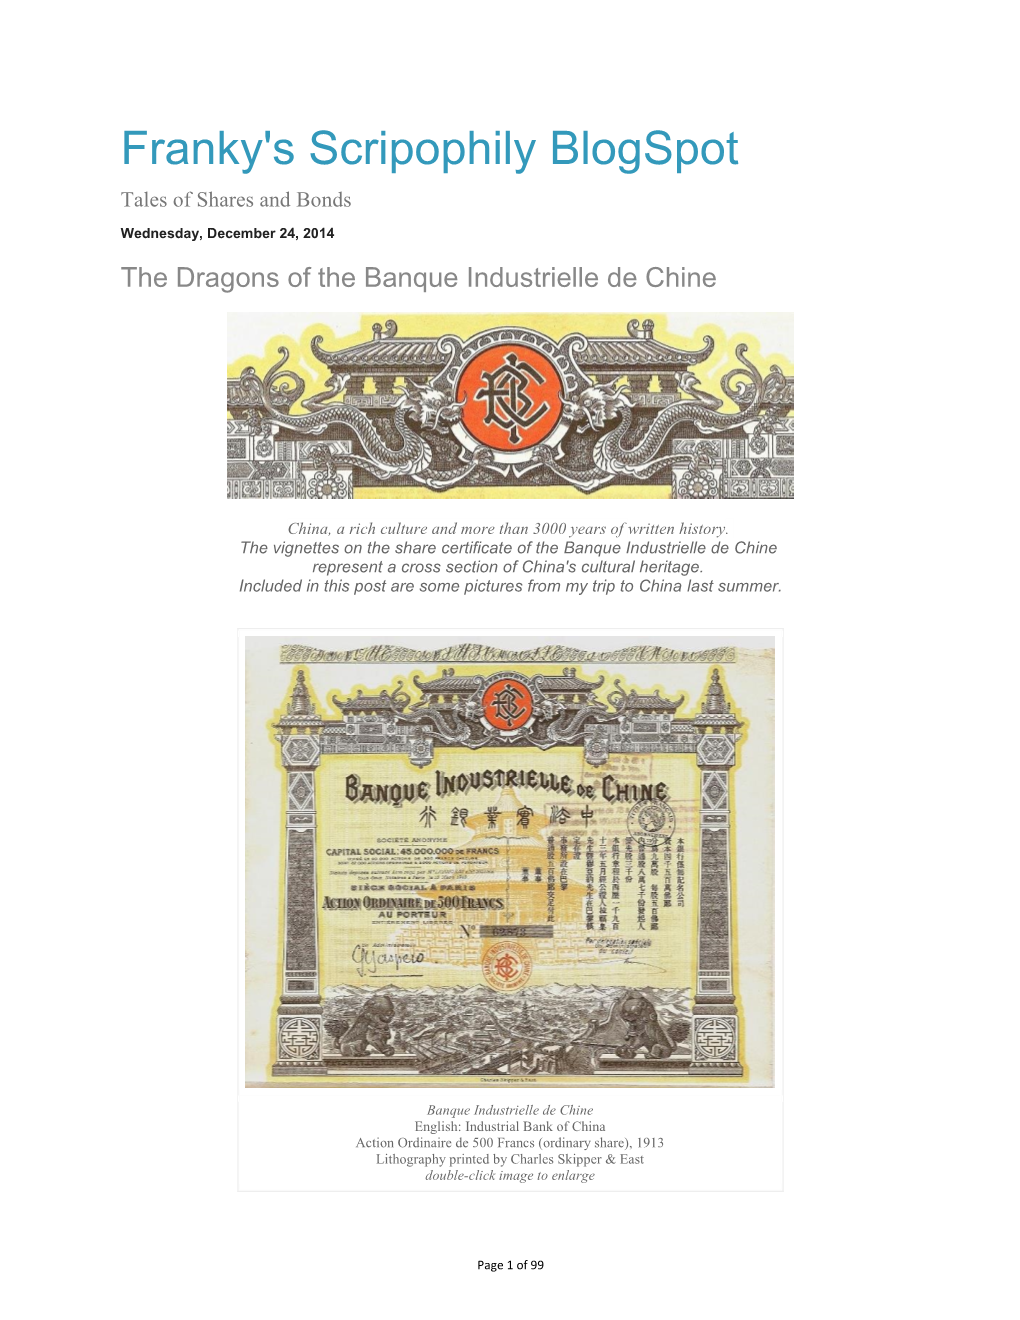 Franky's Scripophily Blogspot Tales of Shares and Bonds